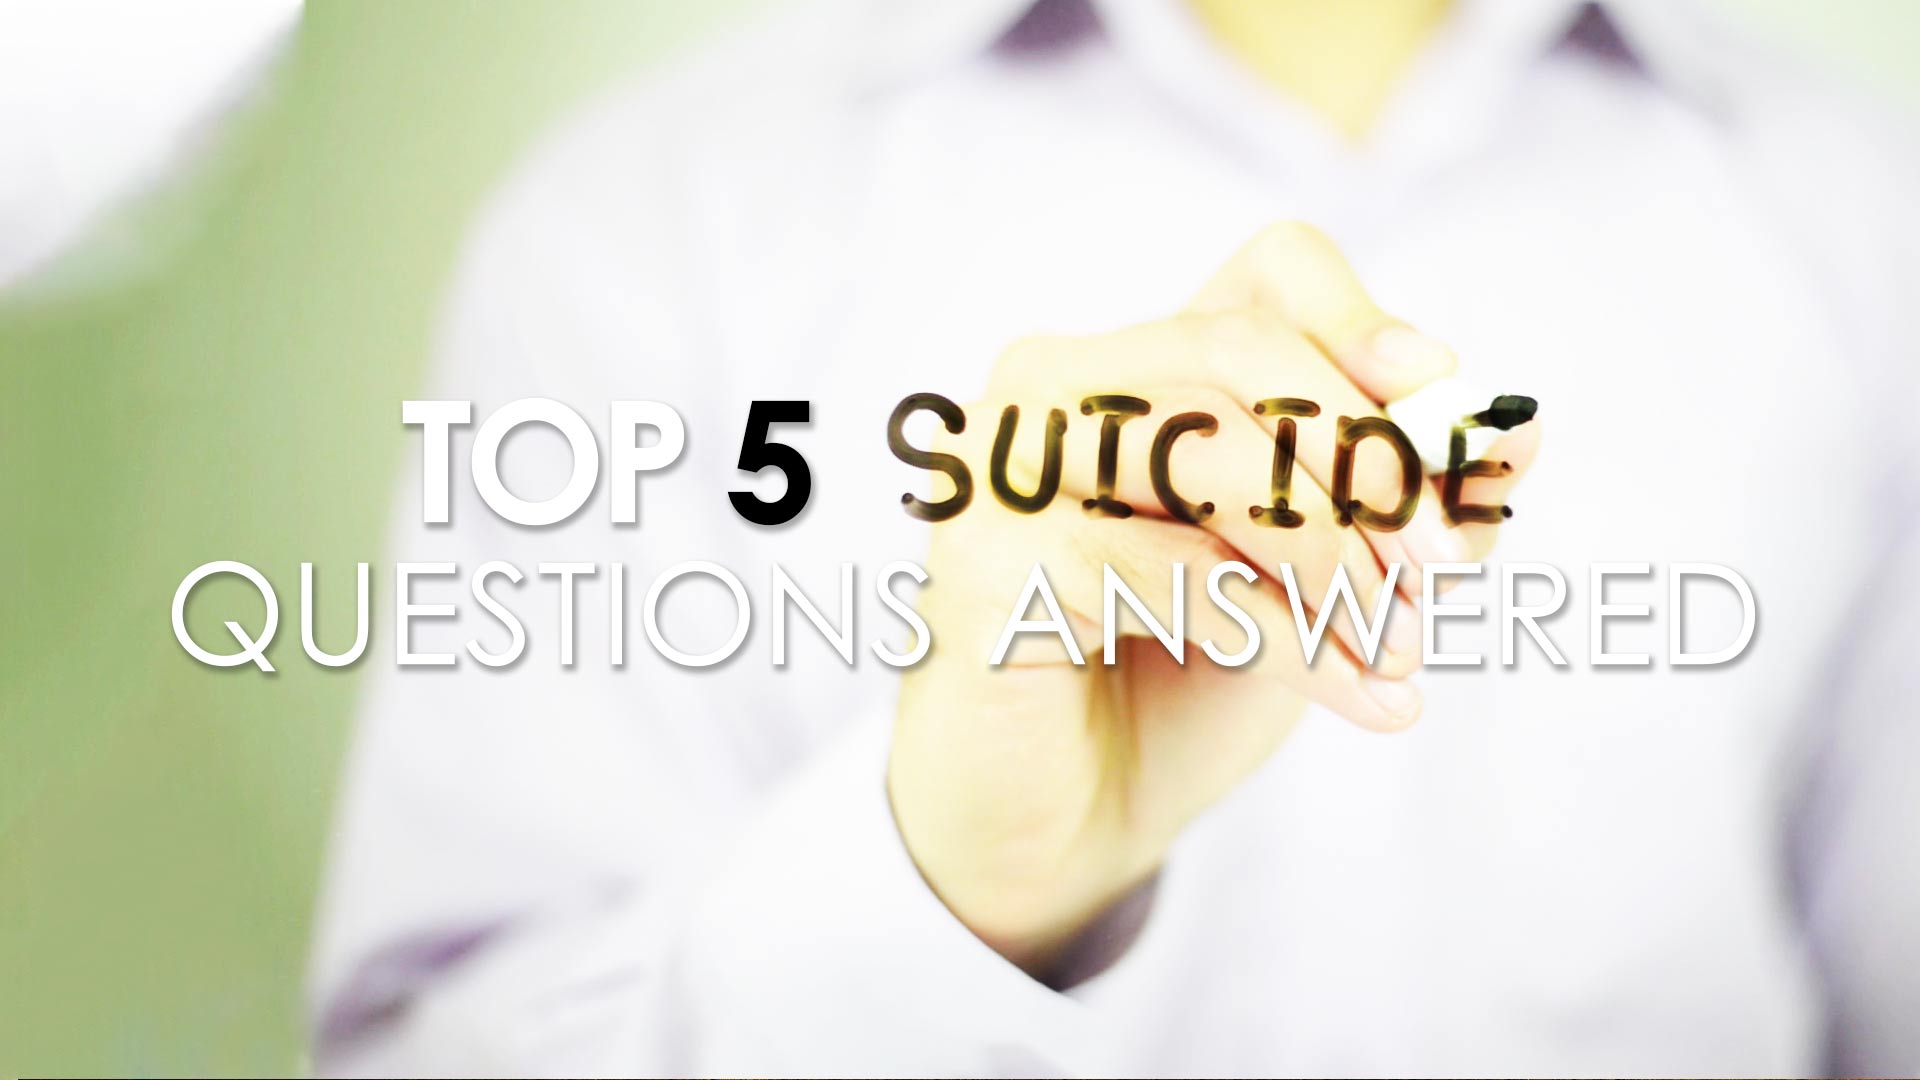 Suicide Prevention Awareness | Top 5 Suicide Questions Answered